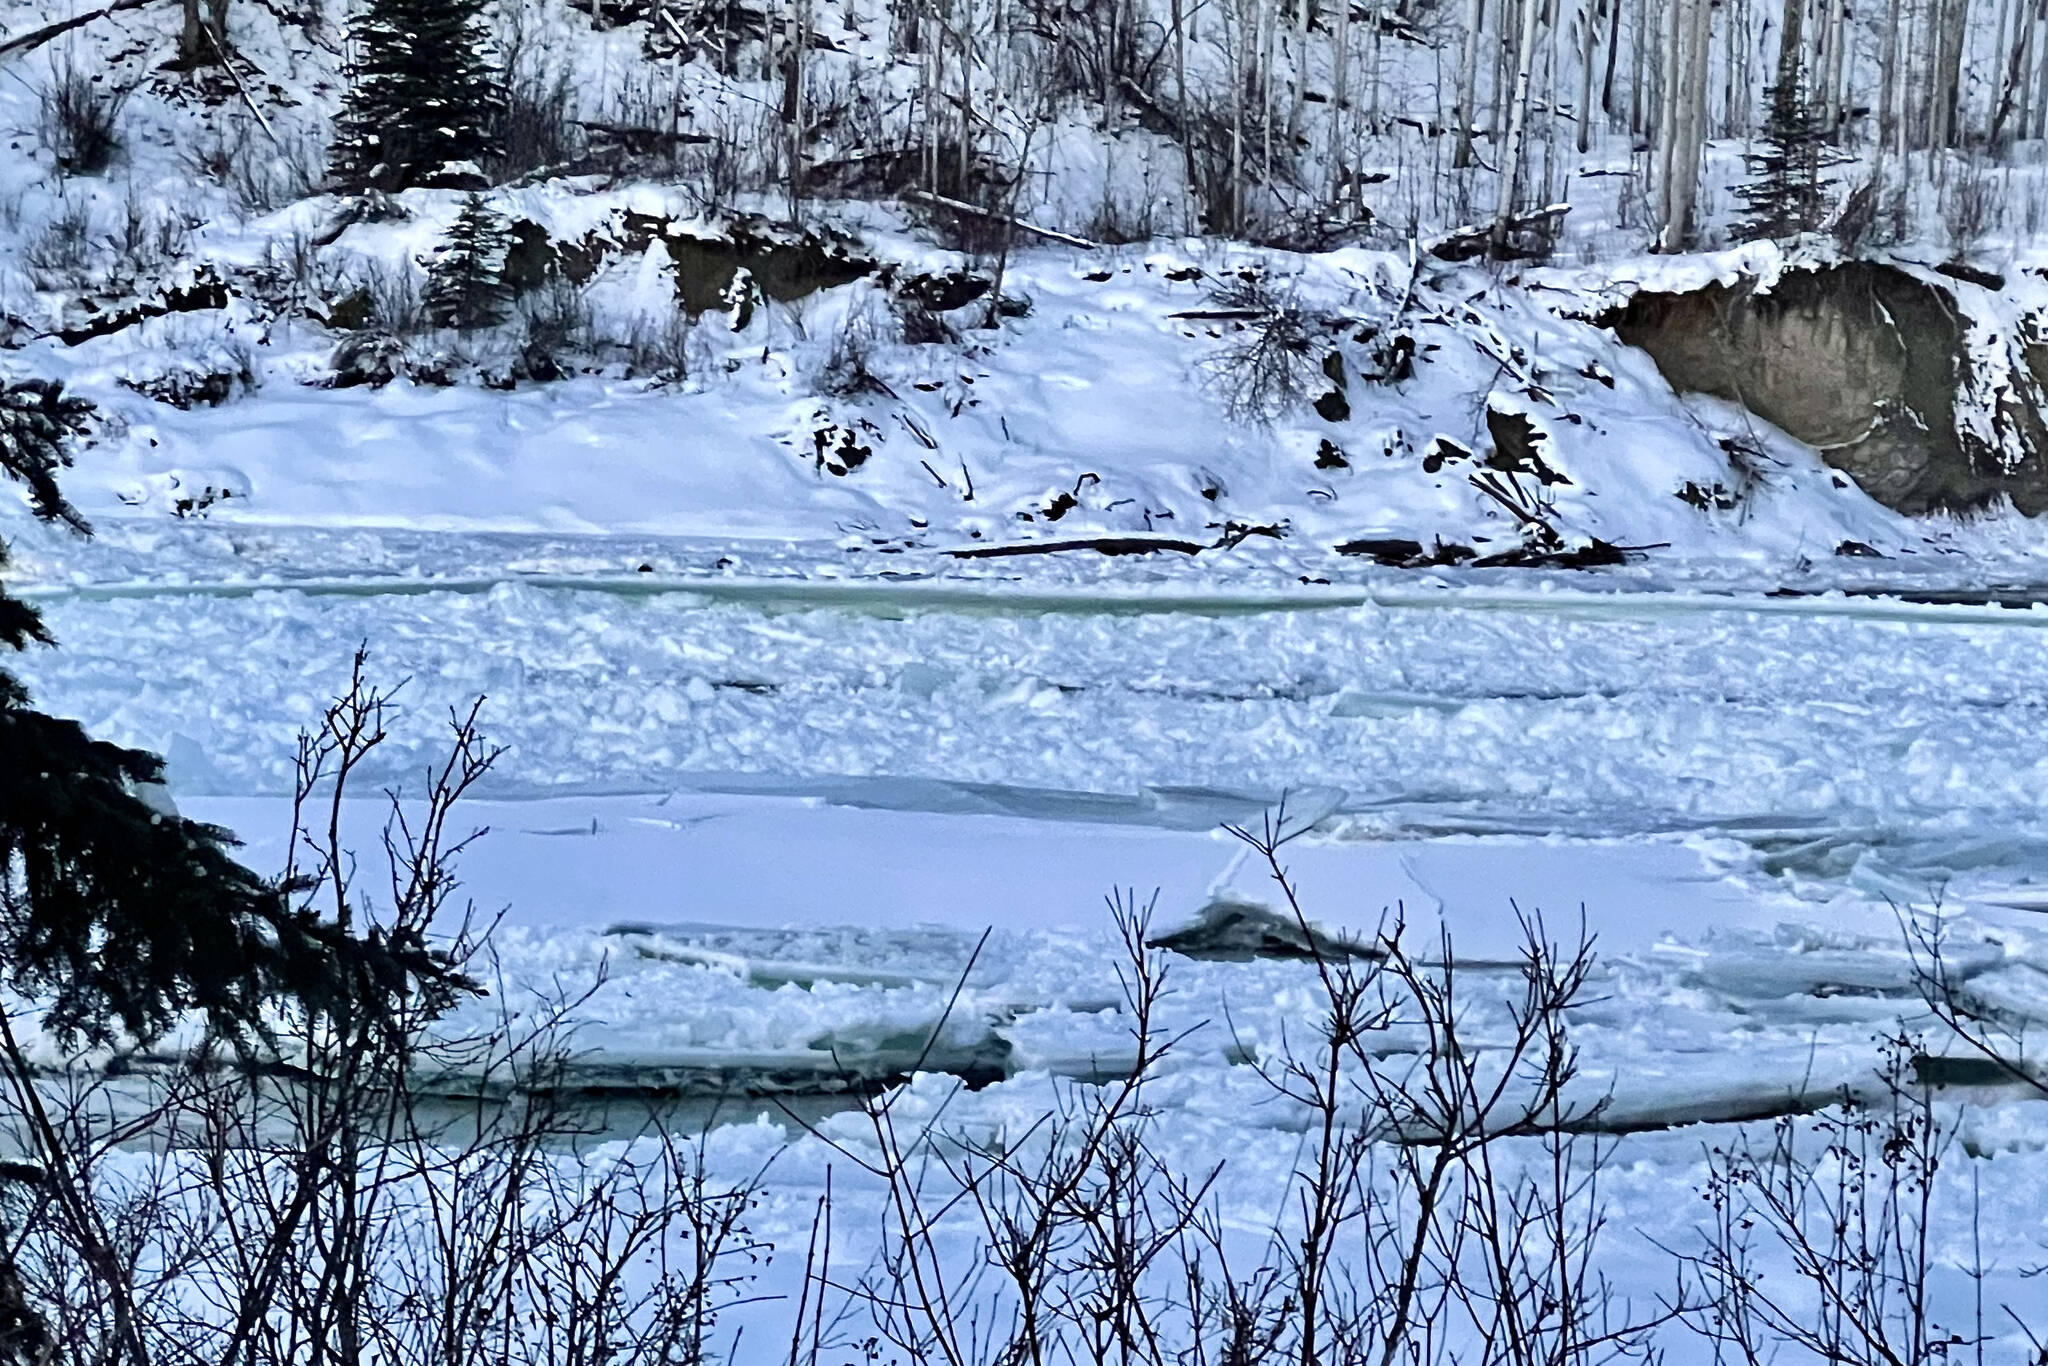 Ice jam forming on the Bulkley River on Dohler Flats (Deb Meissner photo)